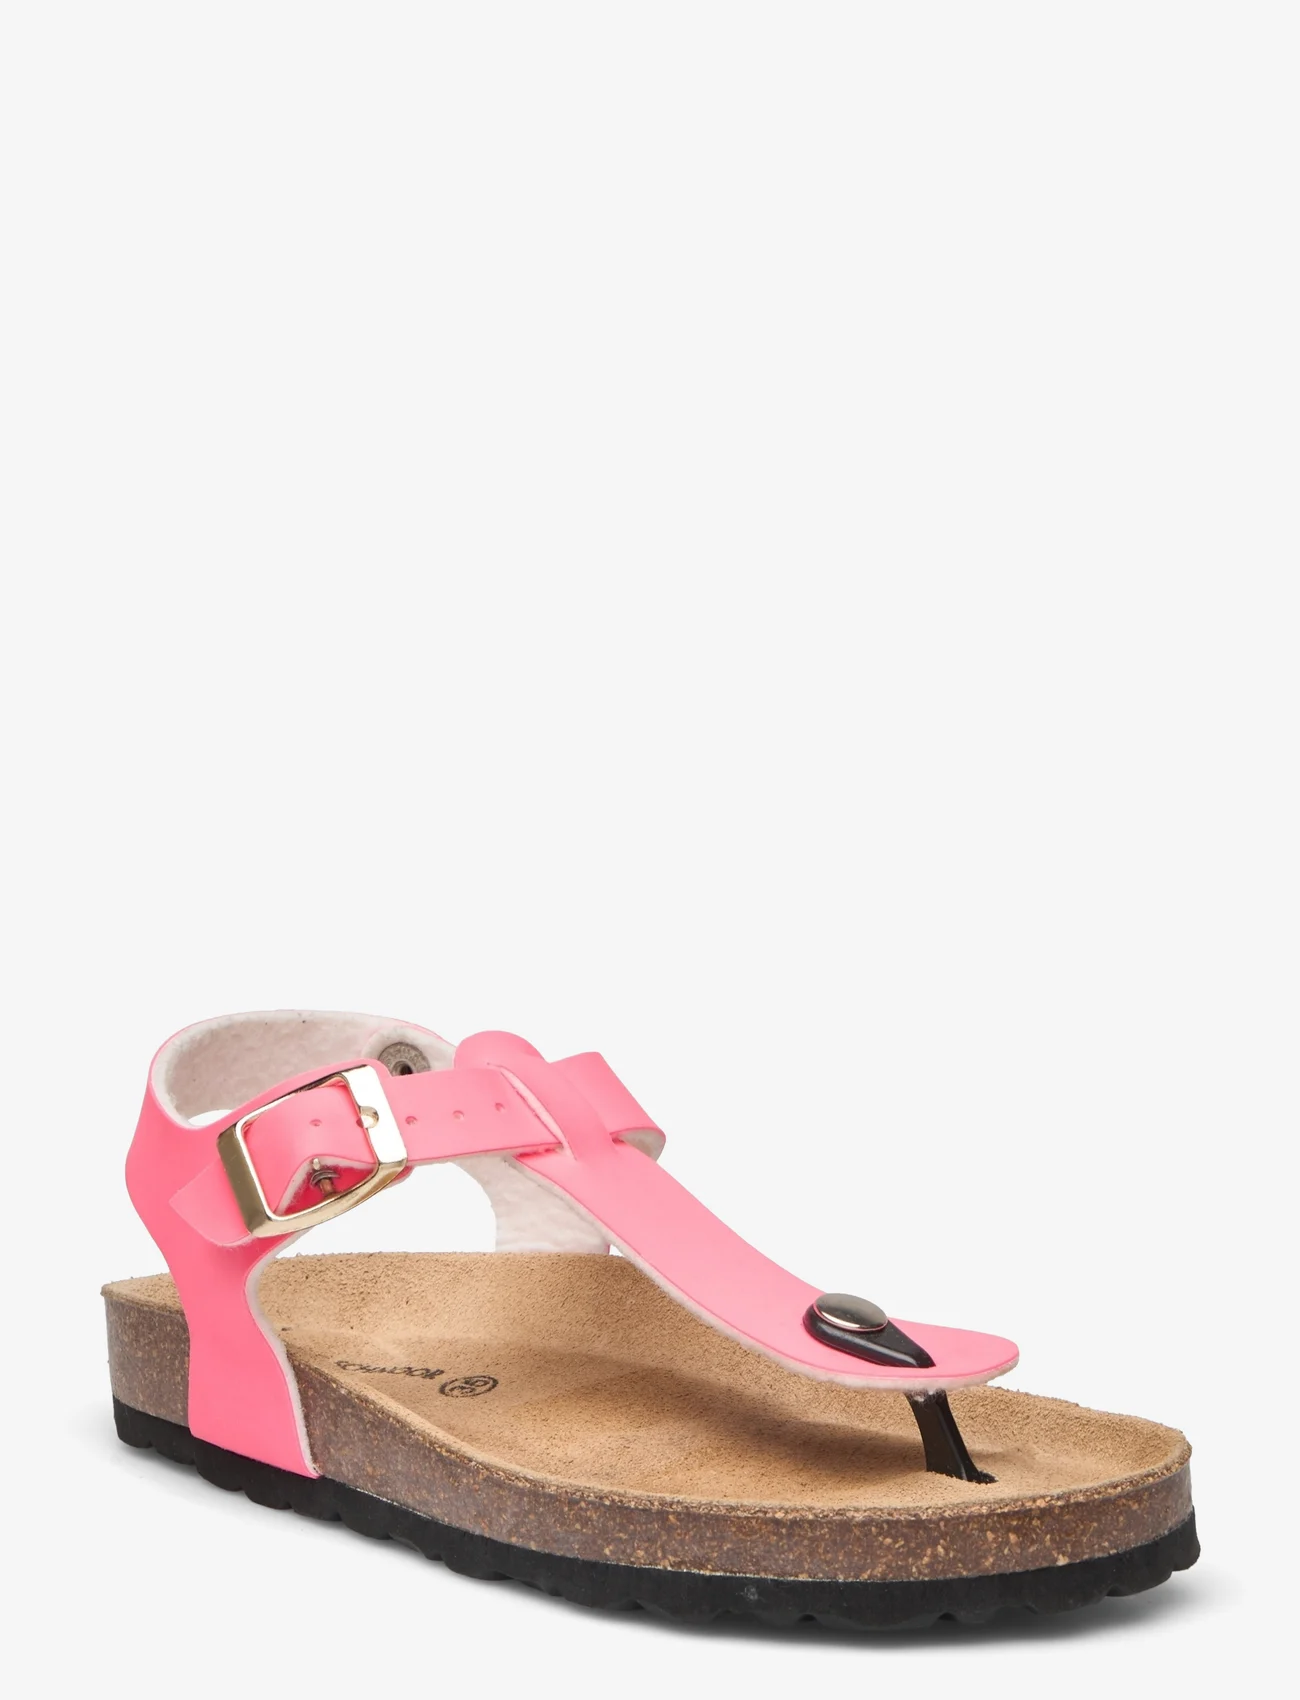 Sofie Schnoor Baby and Kids - Sandal lacquer - sommarfynd - coral pink - 0